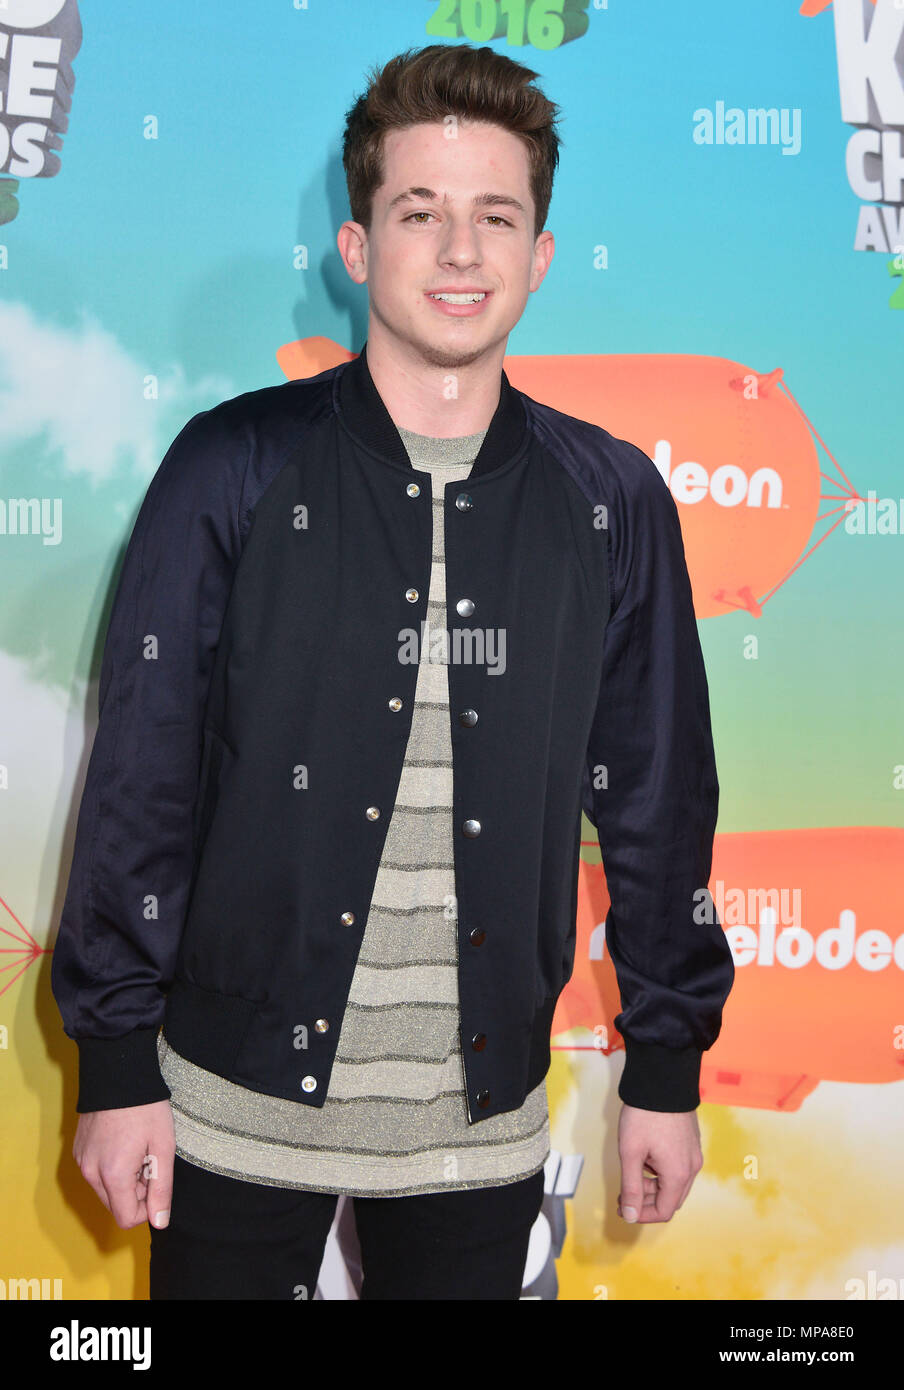 Charlie Puth 156 arriving Nickelodeon's 2016 KidsÕ Choice Awards at the  Great Western Forum in Los Angeles. March 12,  Puth 156  ------------- Red Carpet Event, Vertical, USA, Film Industry, Celebrities,  Photography,